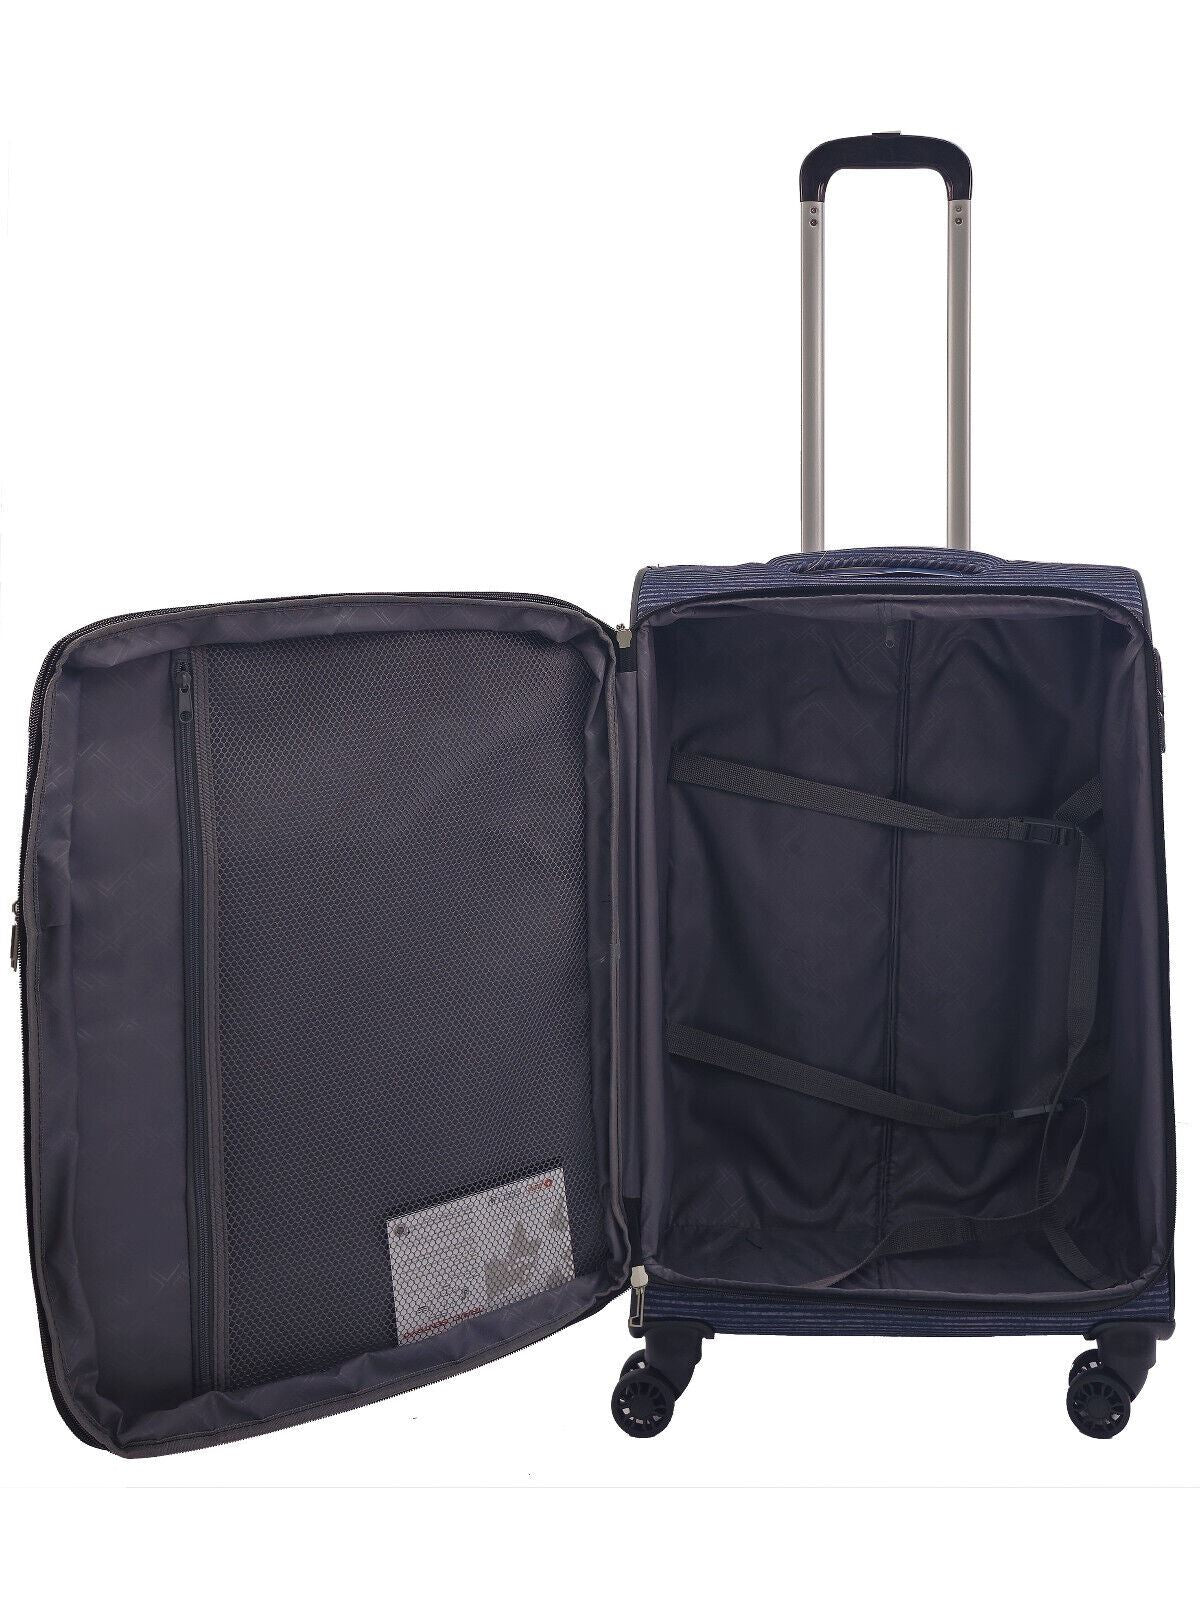 Ashville Medium Soft Shell Suitcase in Lines